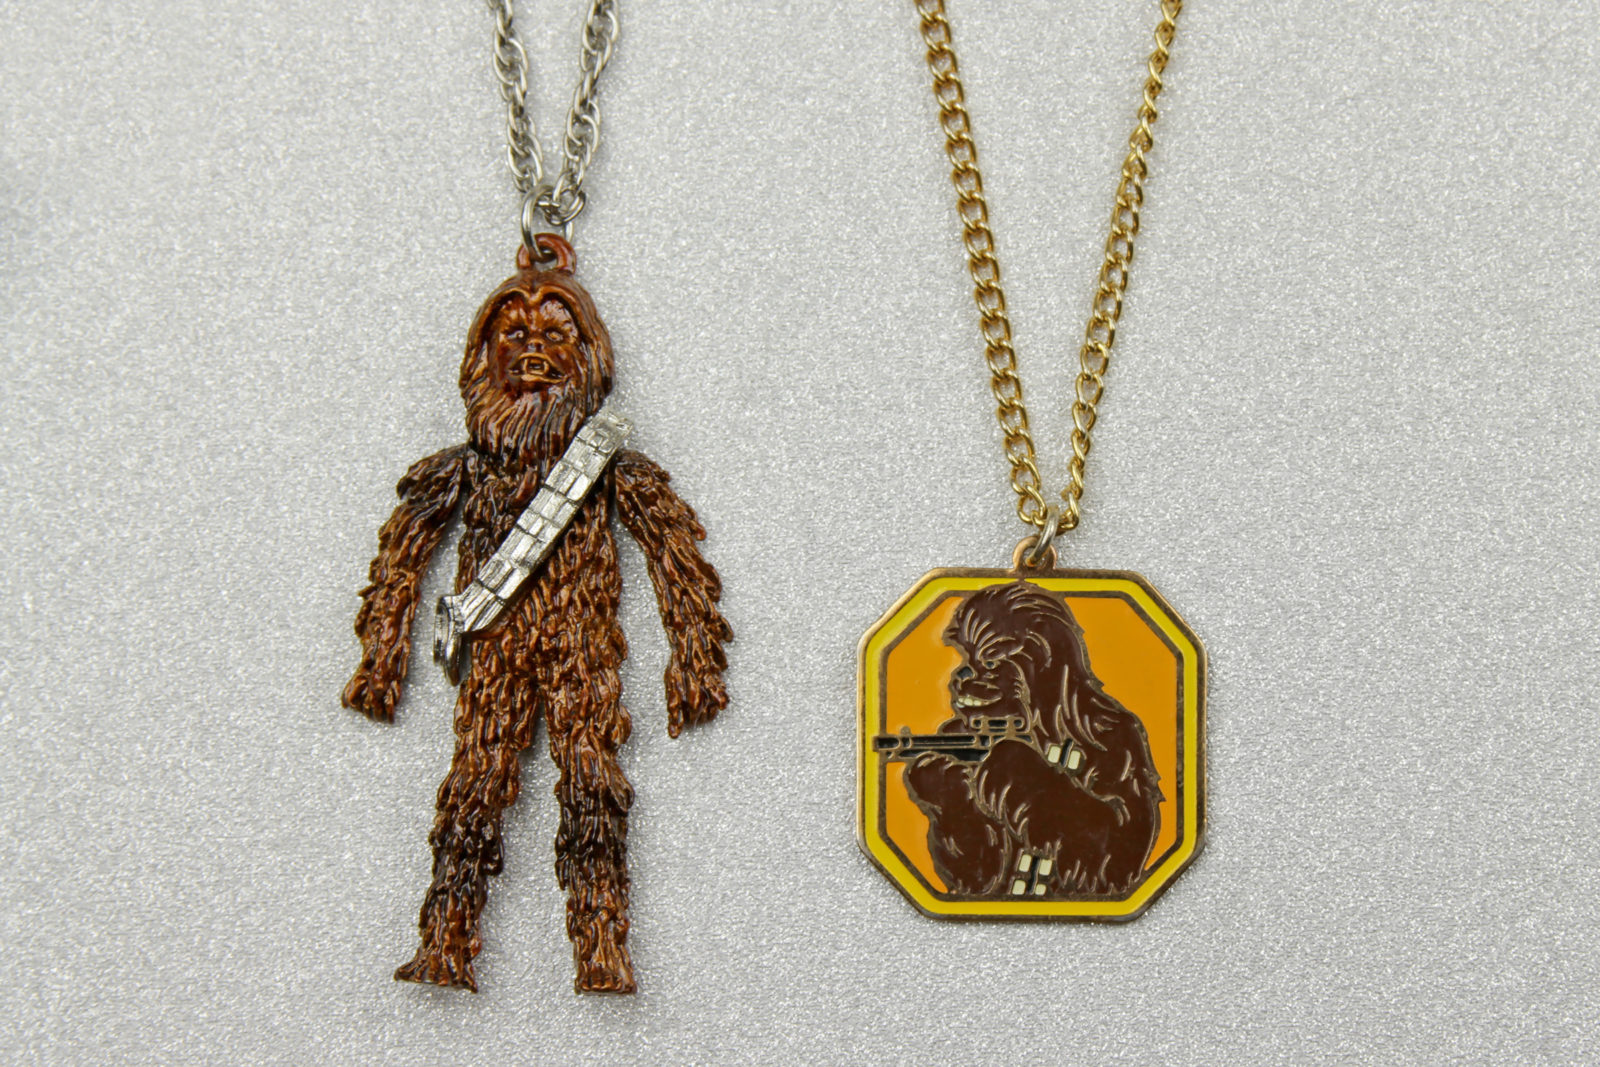 Vintage Star Wars Chewbacca Necklaces from 1977 and 1980